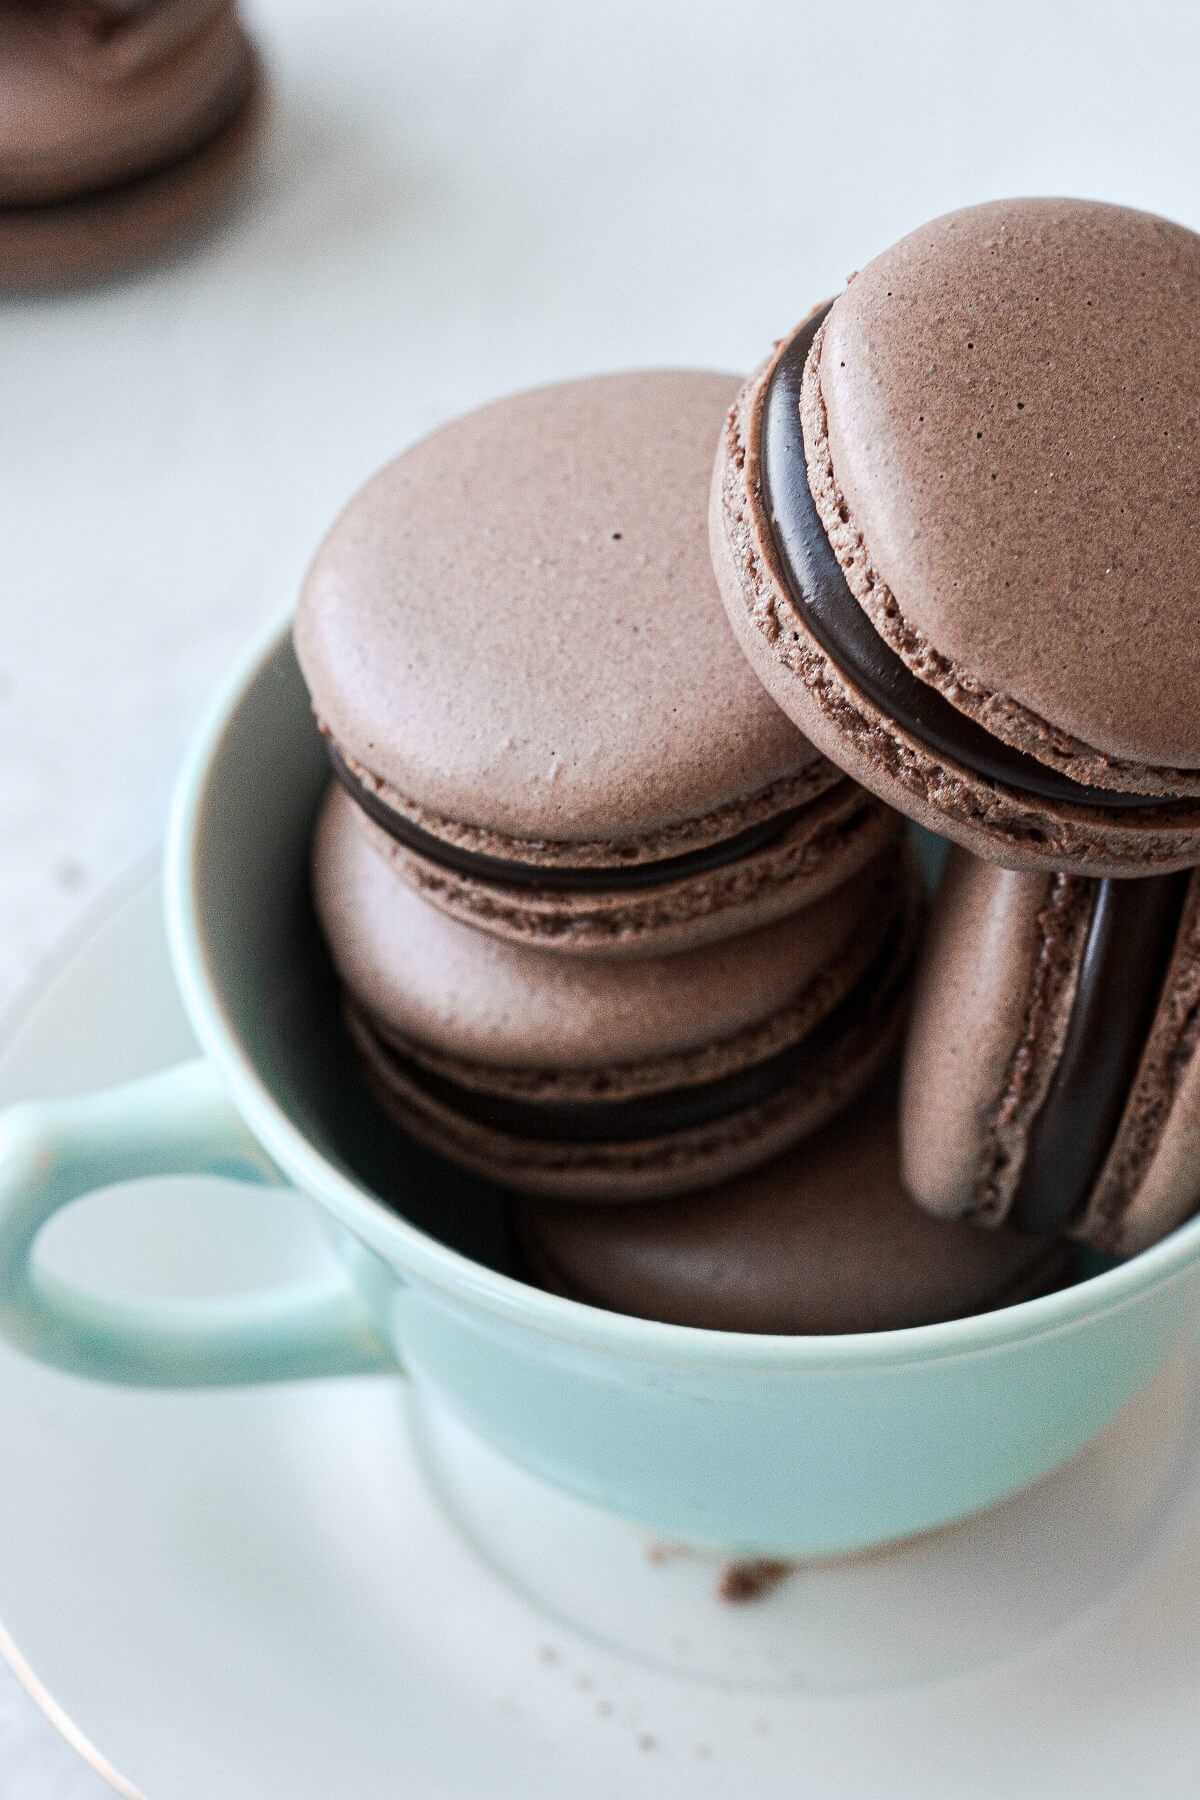 Chocolate macarons, filled with dark chocolate ganache, arranged in a vintage tea cup.